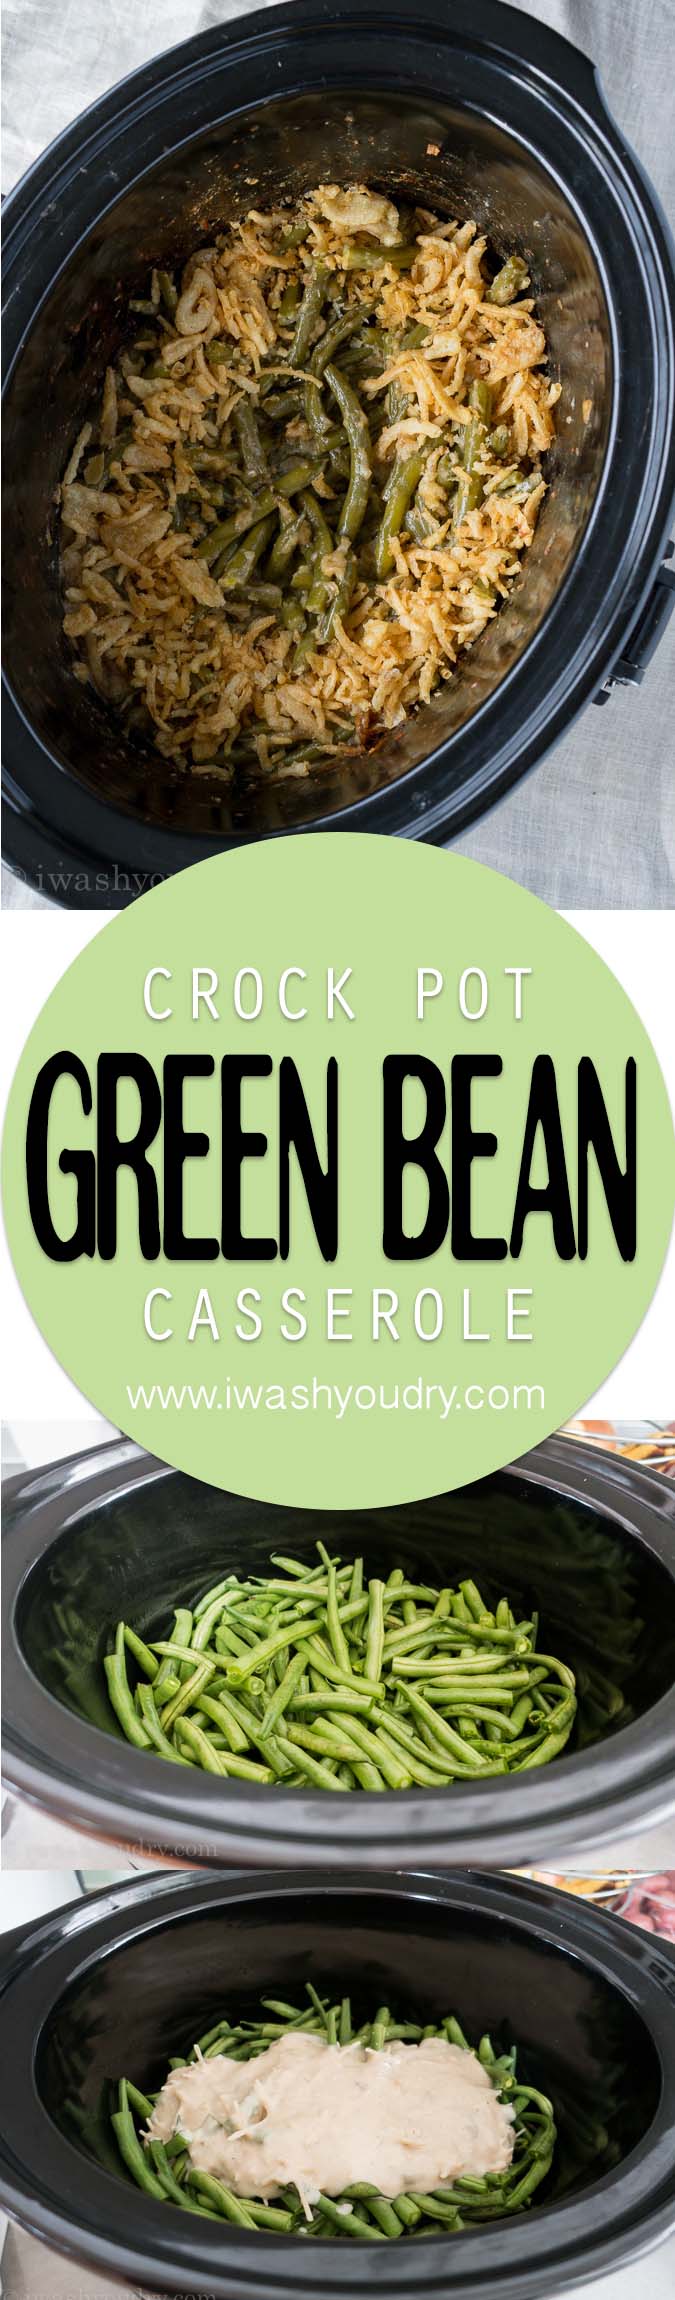 This Crock Pot Green Bean Casserole recipe is a perfect side dish for Thanksgiving or Christmas when the oven is full.